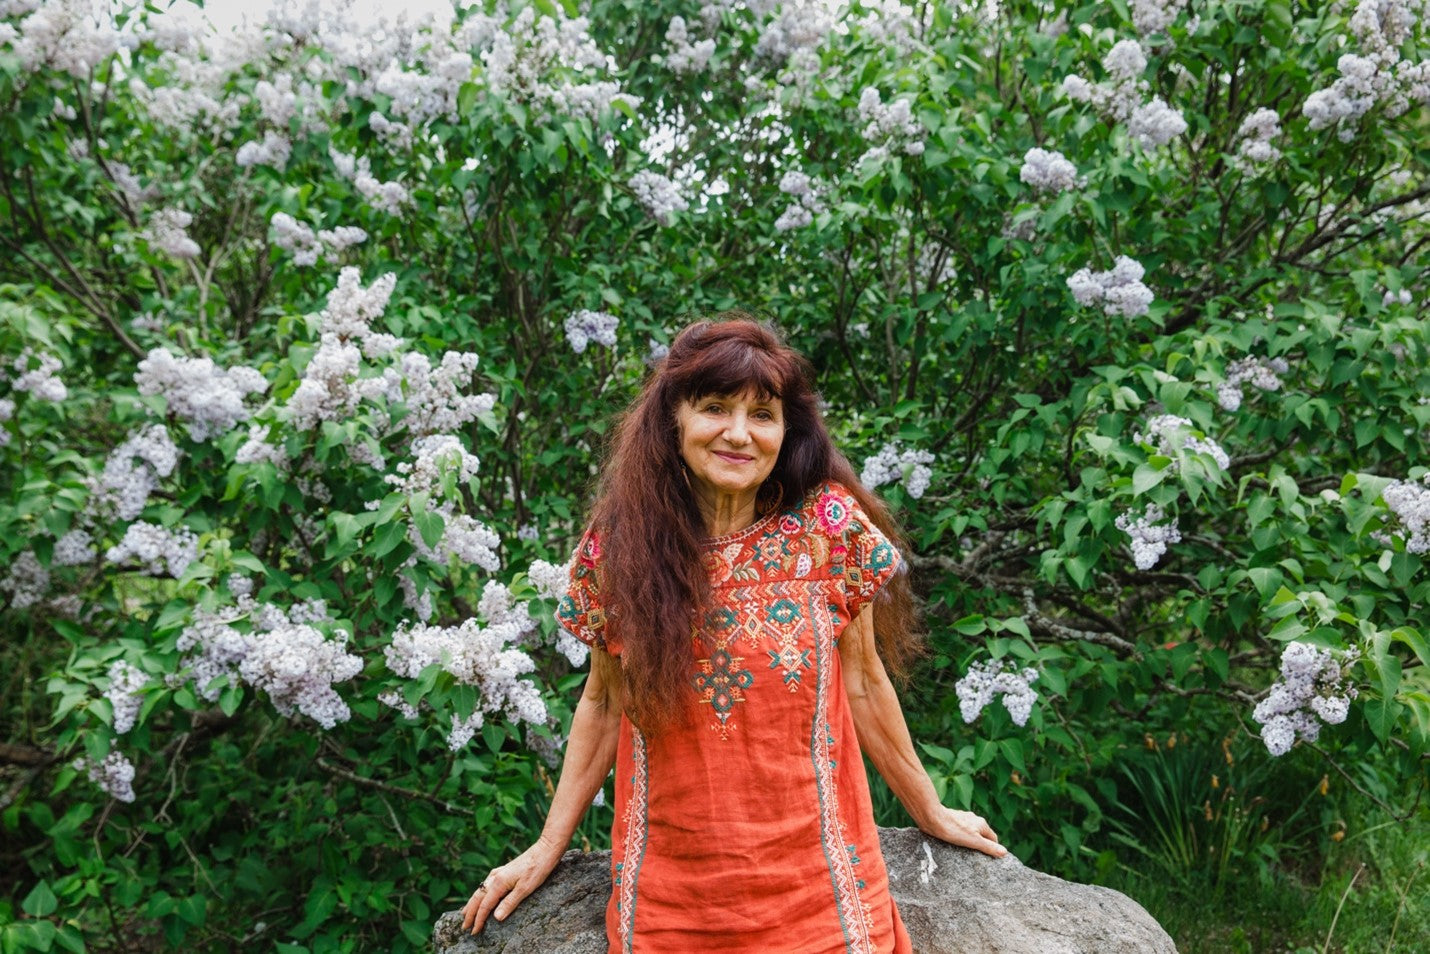 Q&A with Rosemary Gladstar, “Godmother of Modern Herbalism” and Traditional Medicinals Co-Founder